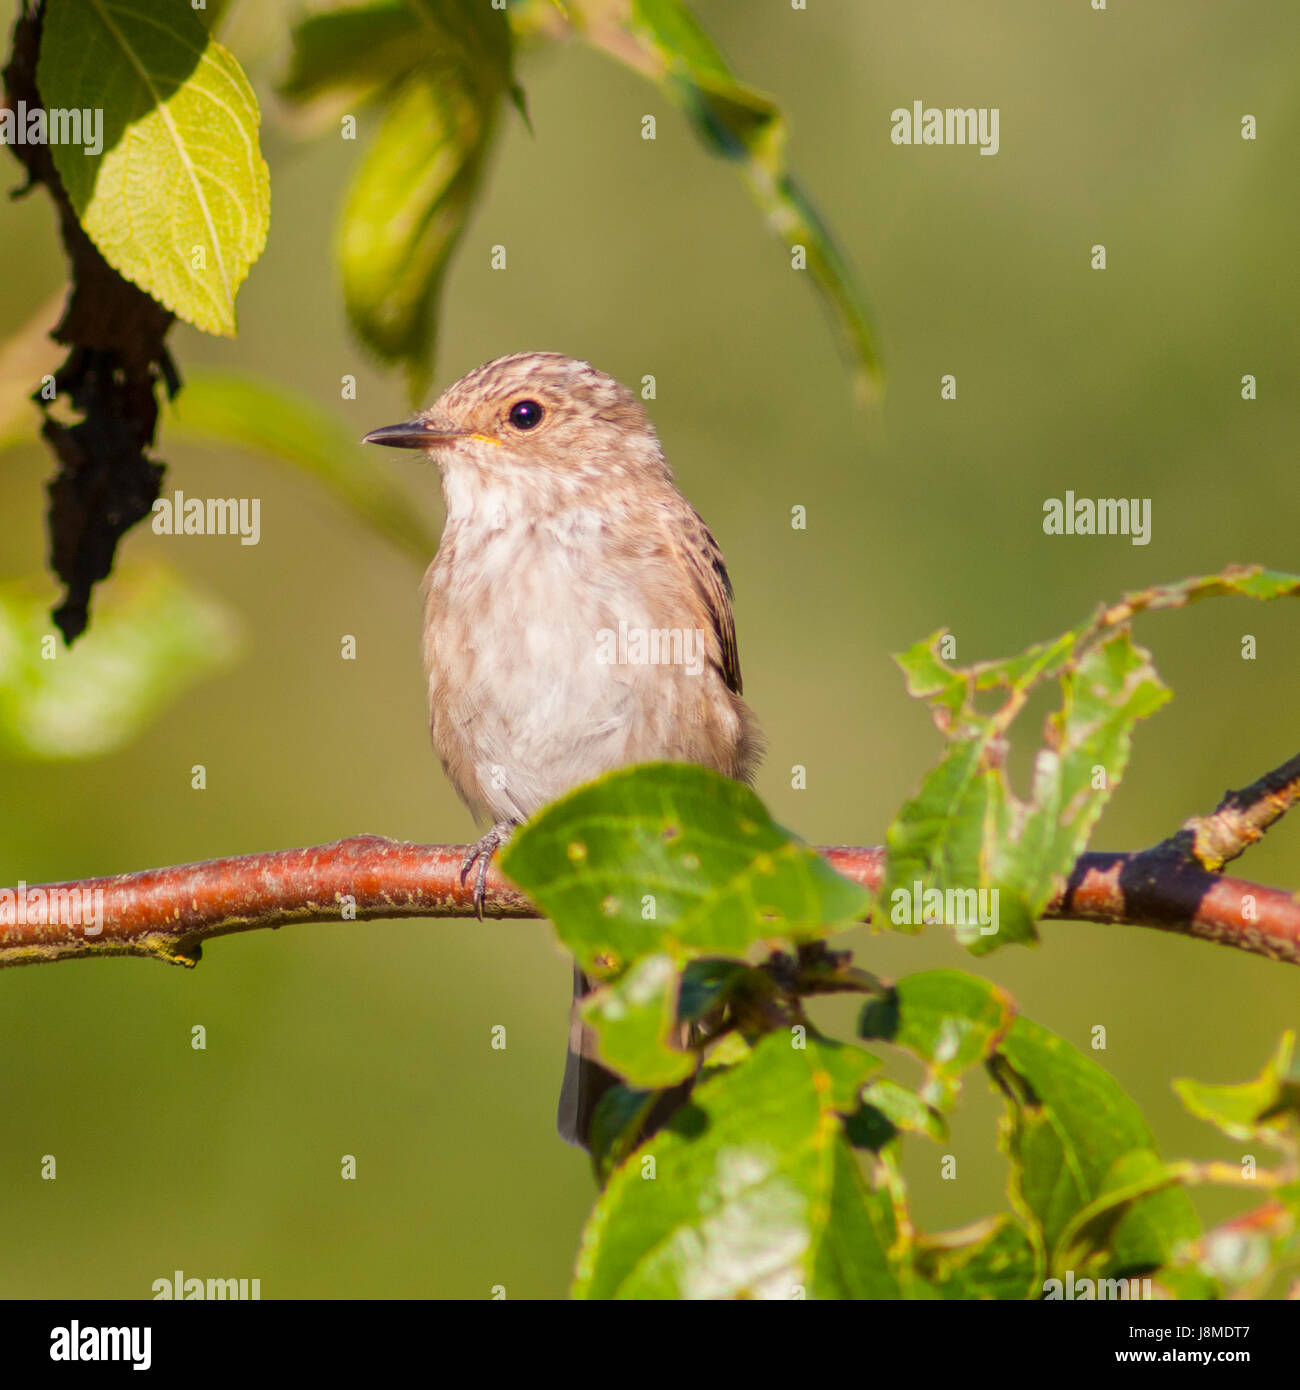 A Spotted Flycatcher  (Muscicapa striata) in the uk Stock Photo